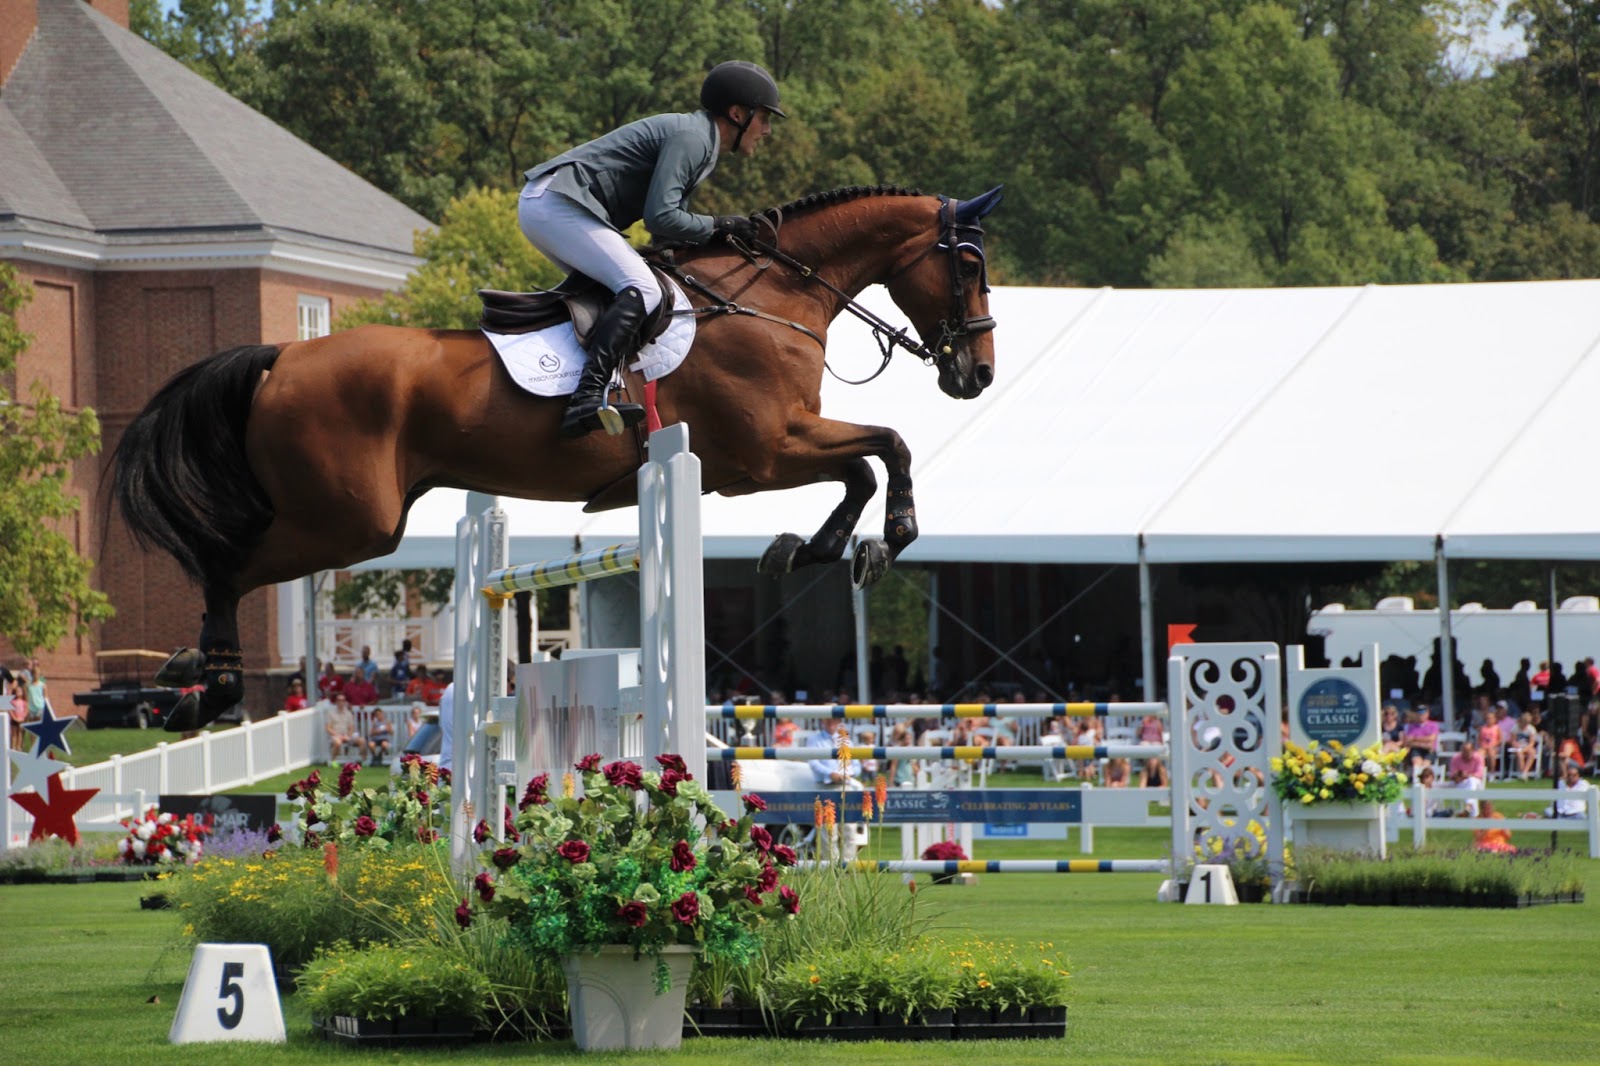 International rider on a bay show jumper clears a large vertical